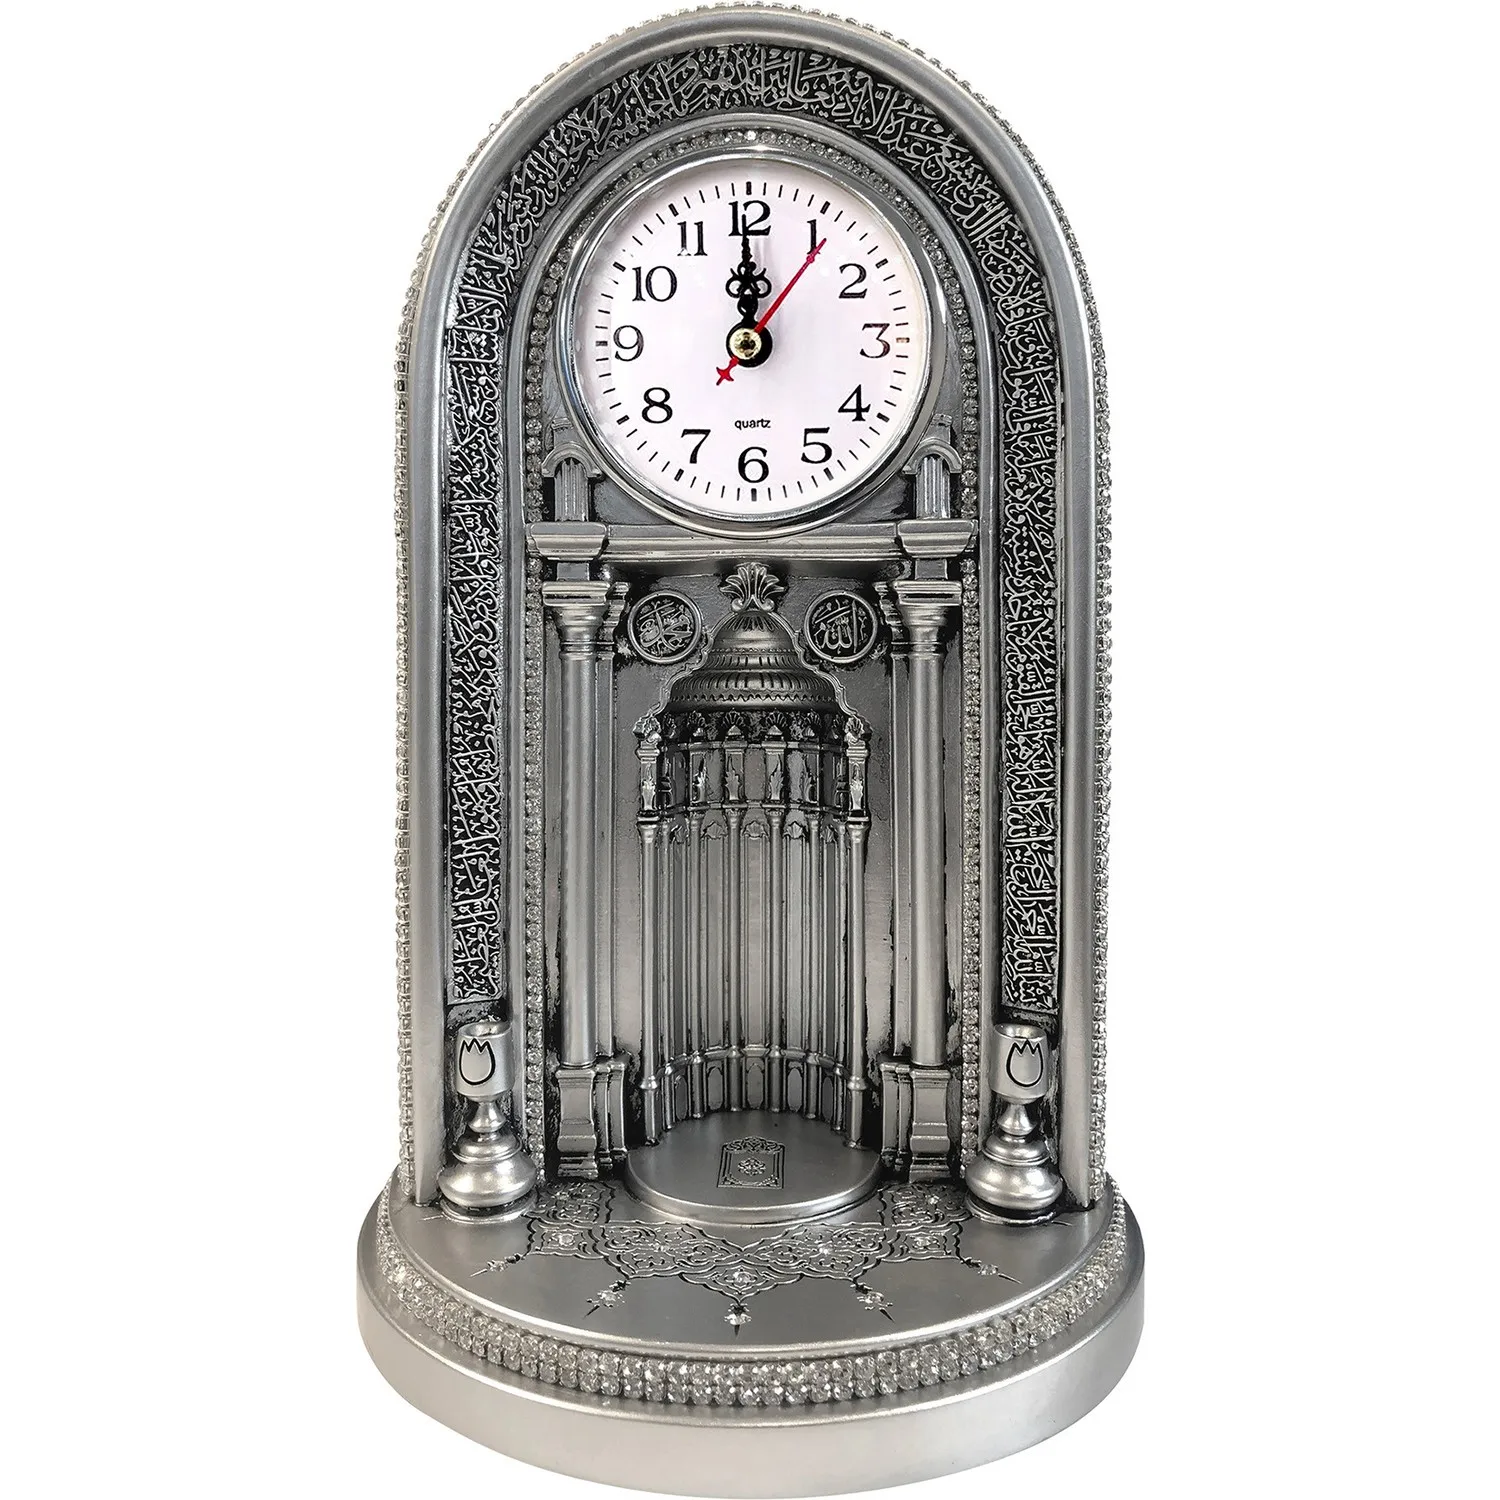 GREAT GIFT Mevlüt gift Eyüp Sultan Mosque Clock Mihrab Trinket Large Silver FREE SHIPPING